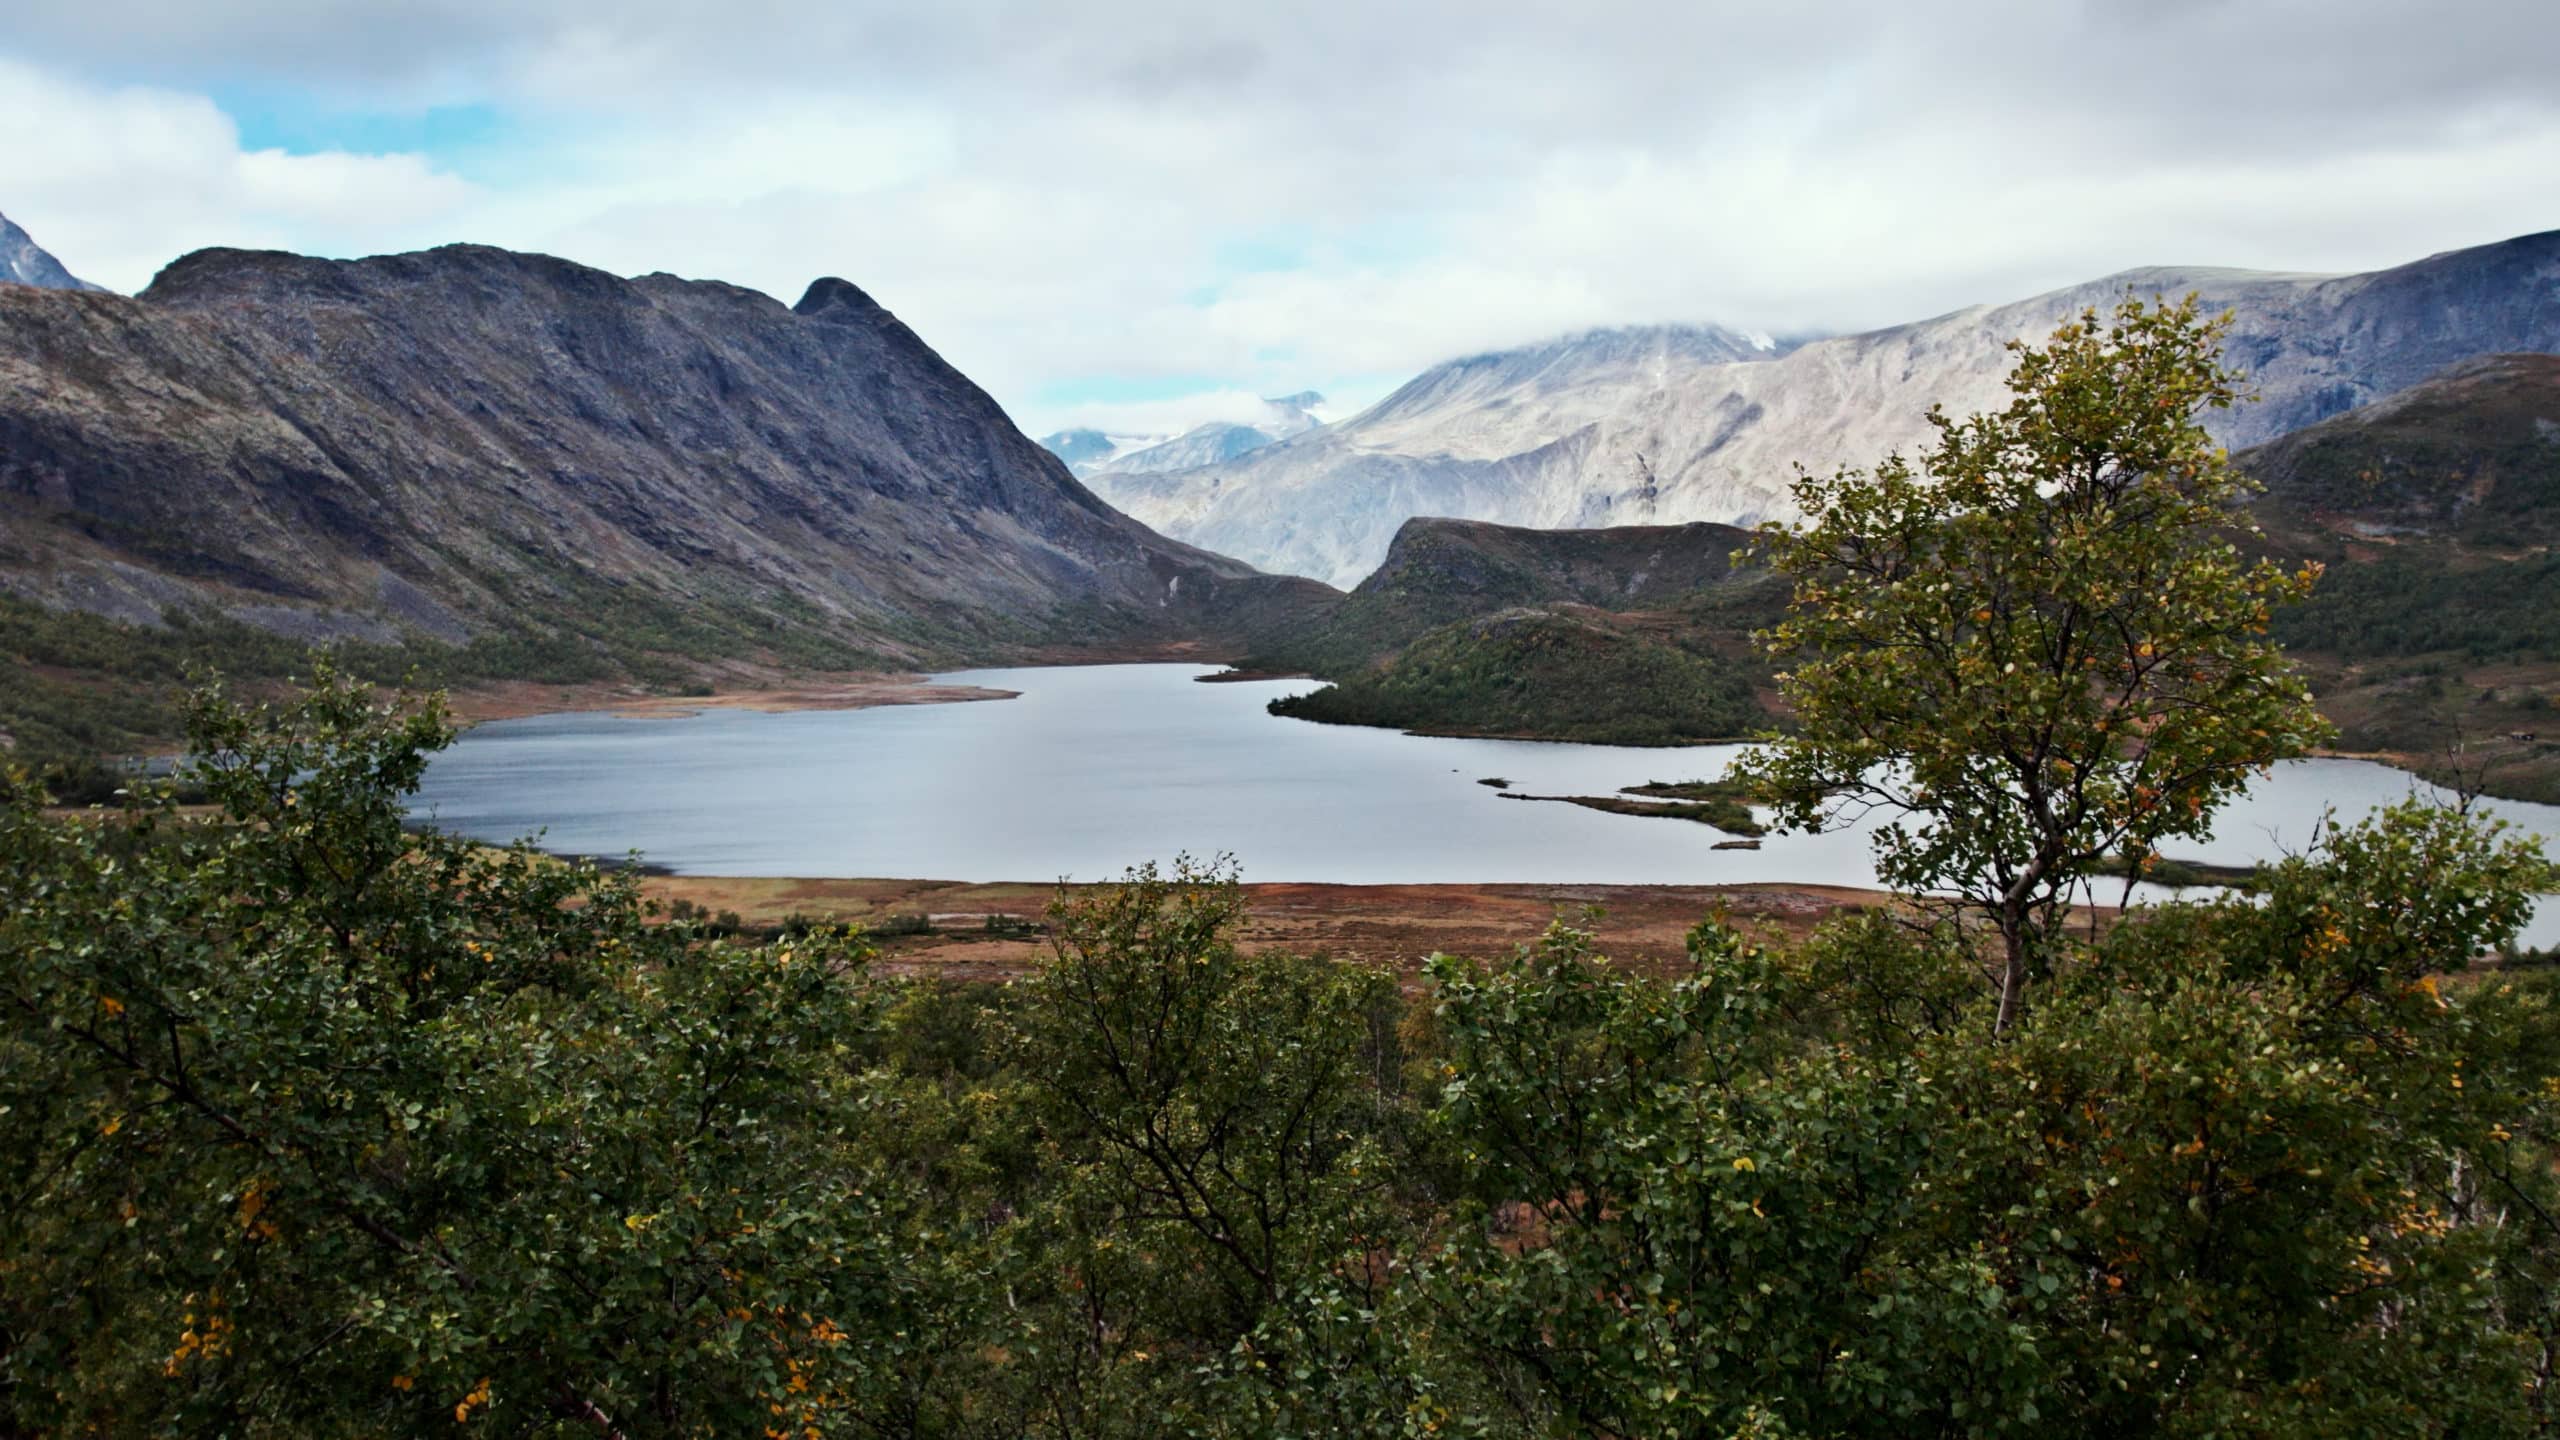 The view of a lake at the foot of Besseggen mountain with surrounding trees.